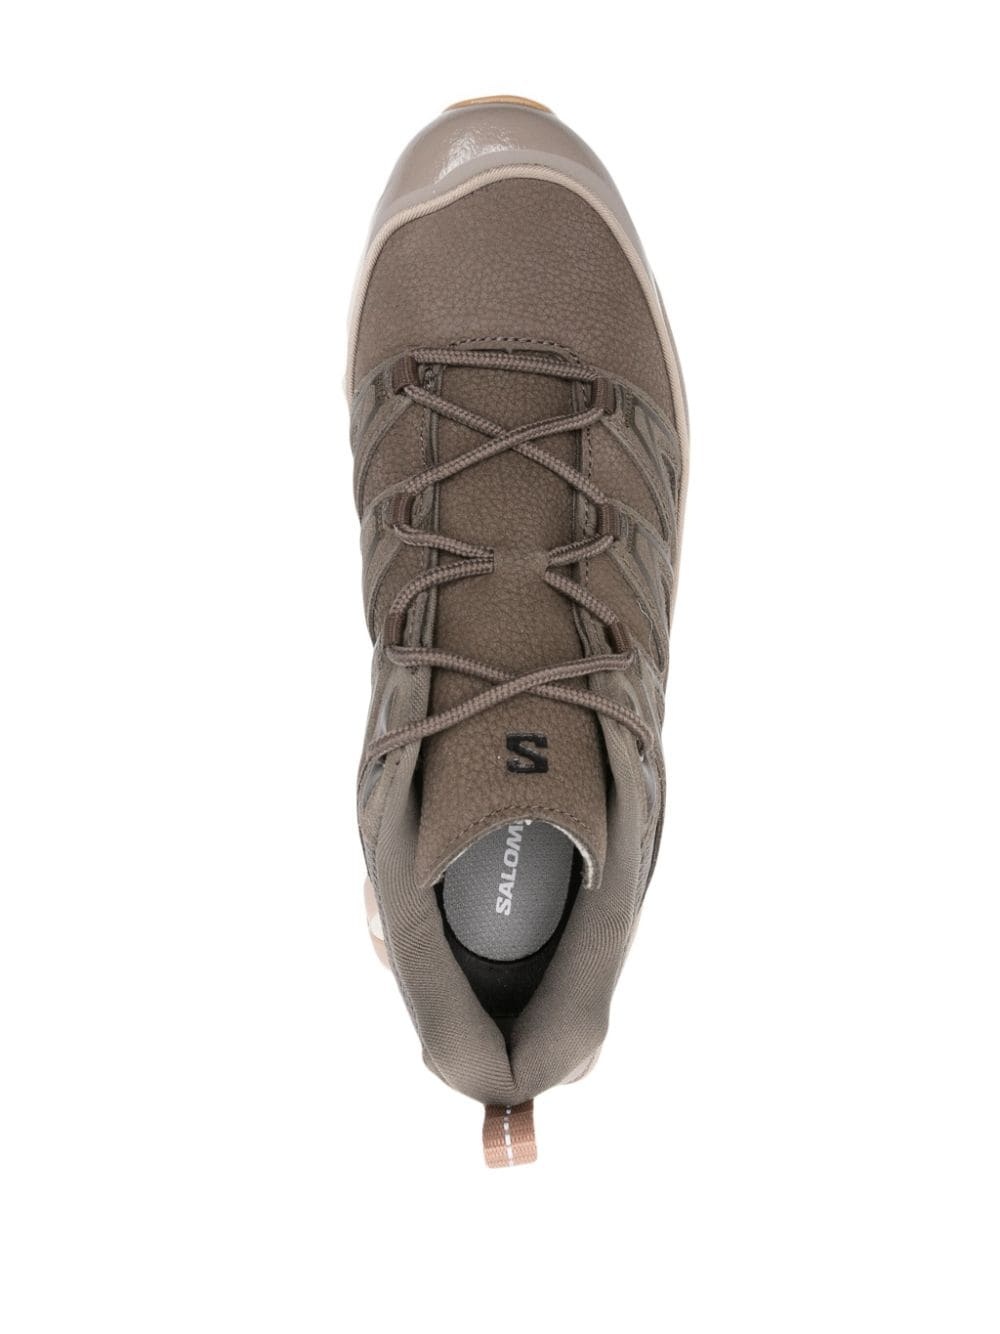 XT-6 Expanse leather sneakers - 4